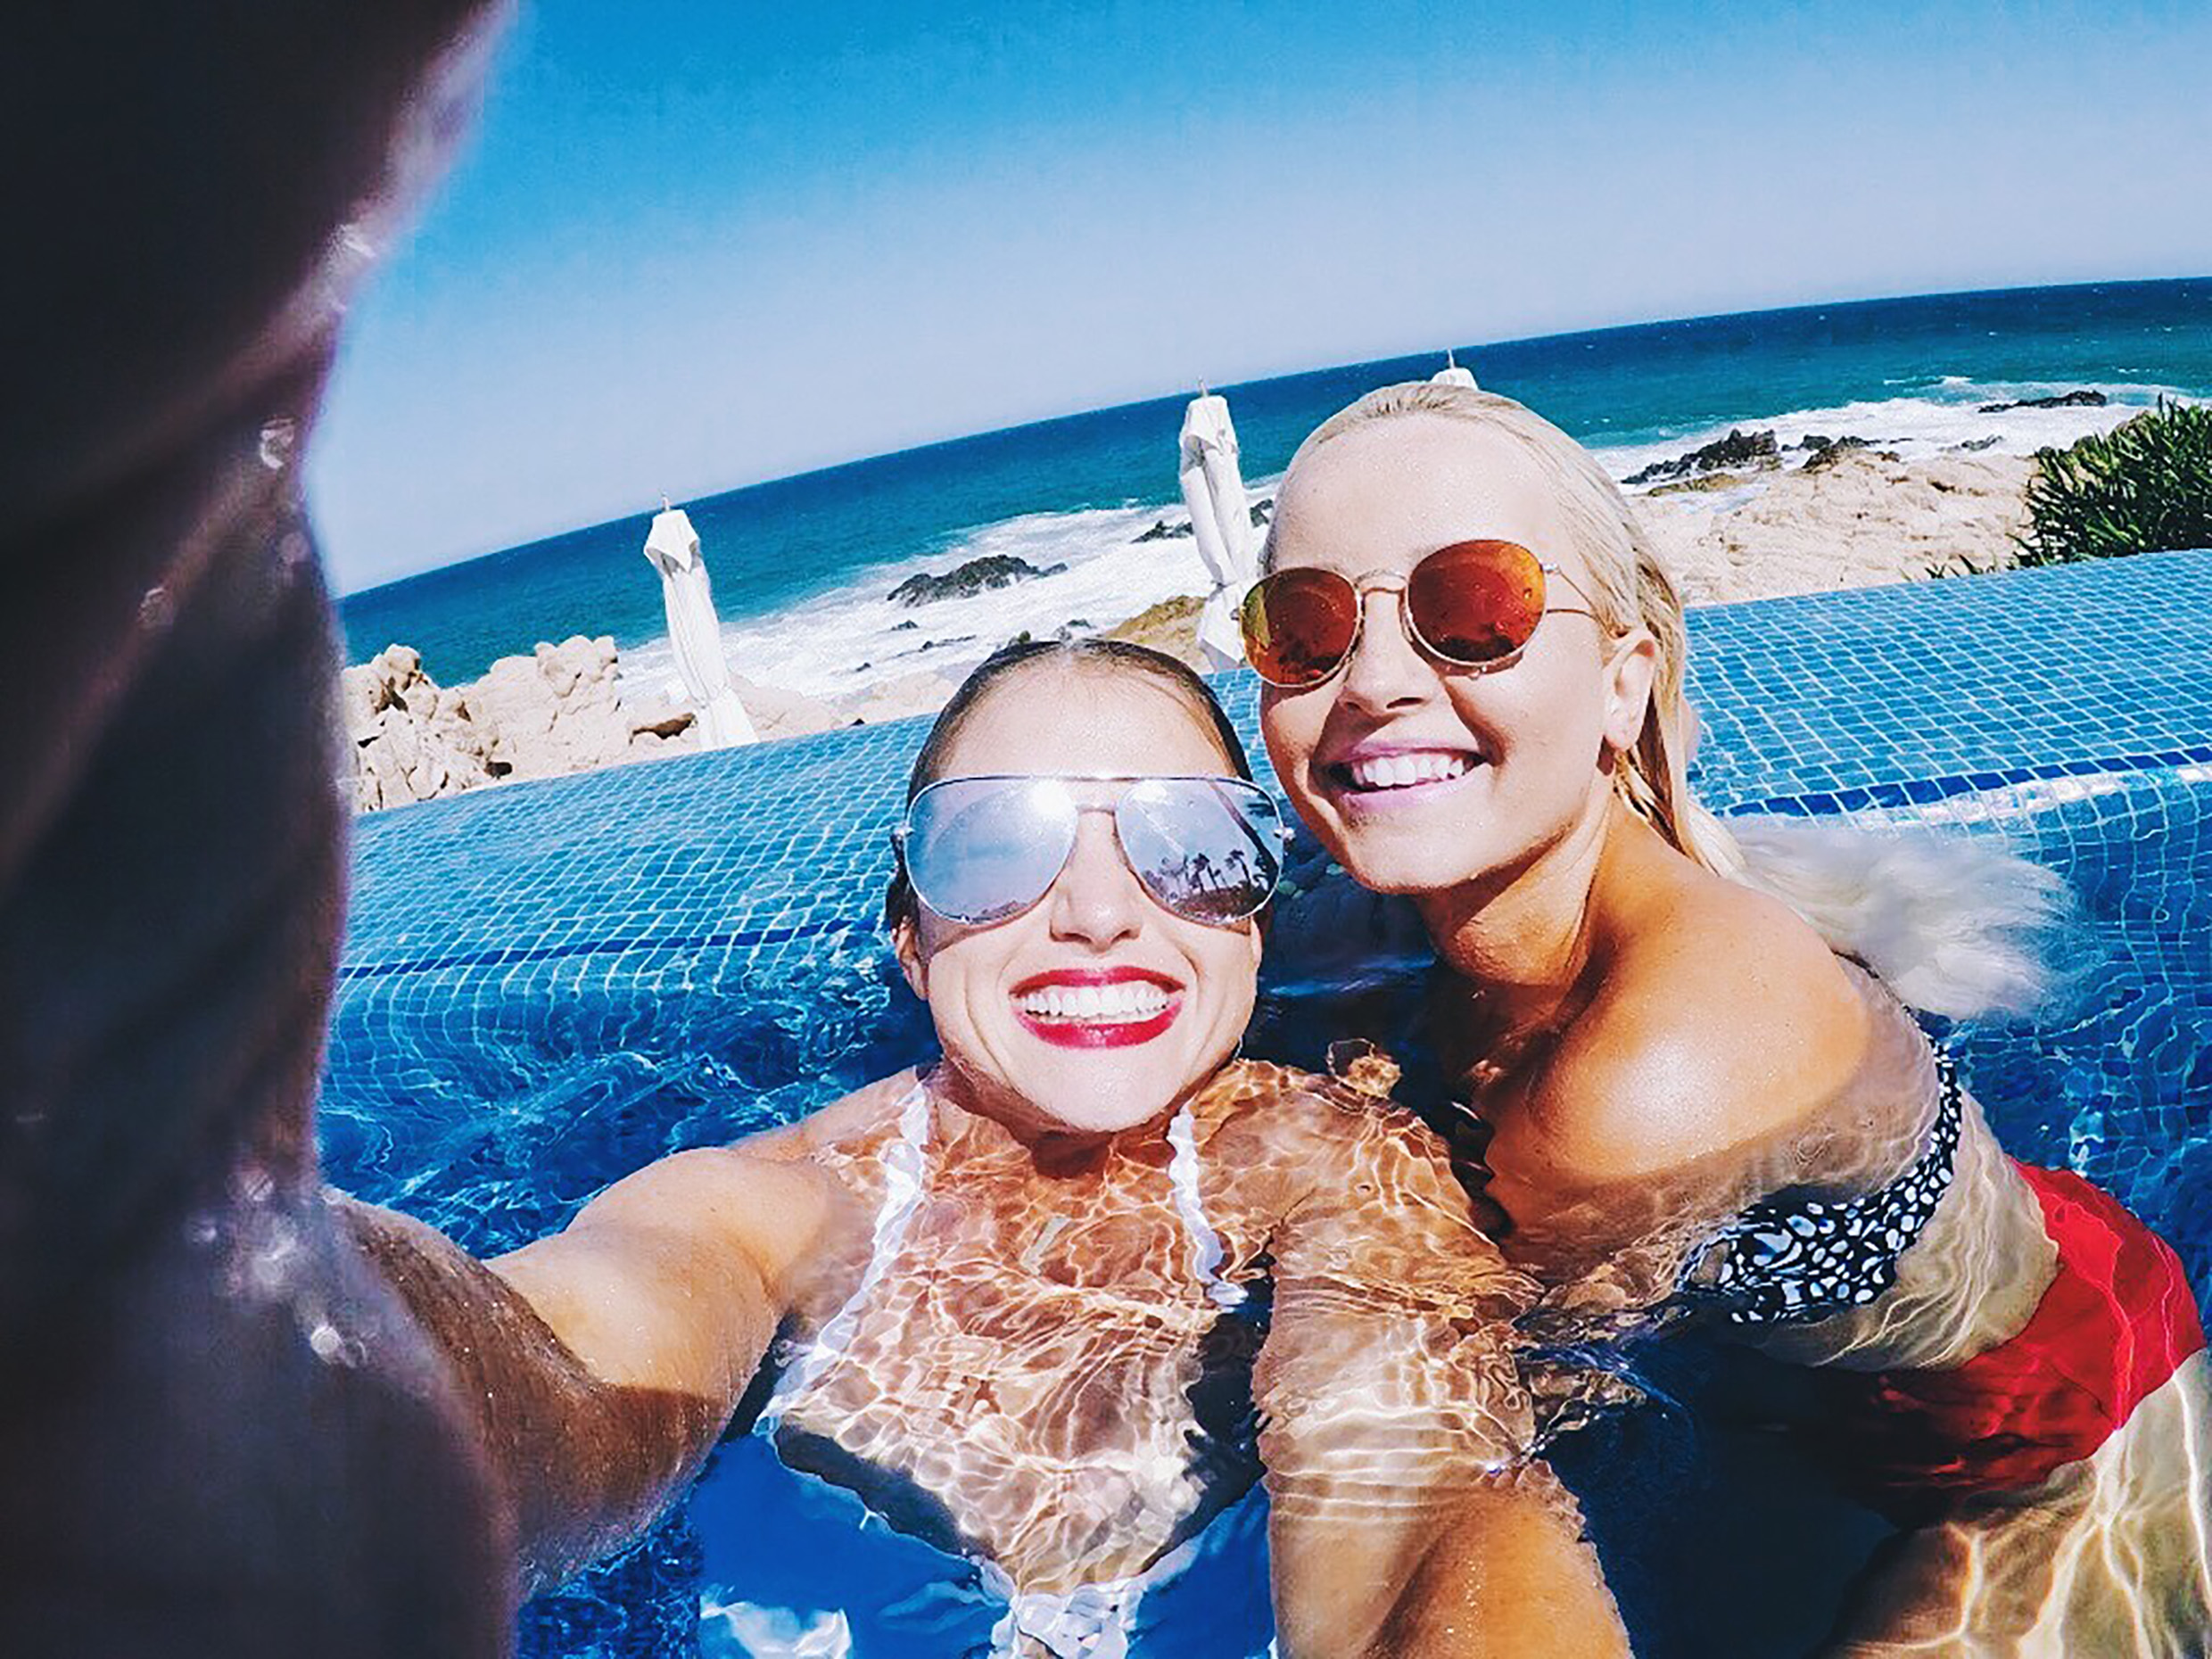 Alena Gidenko of modaprints.com shares a blog of her trip to Cabo with her best friend